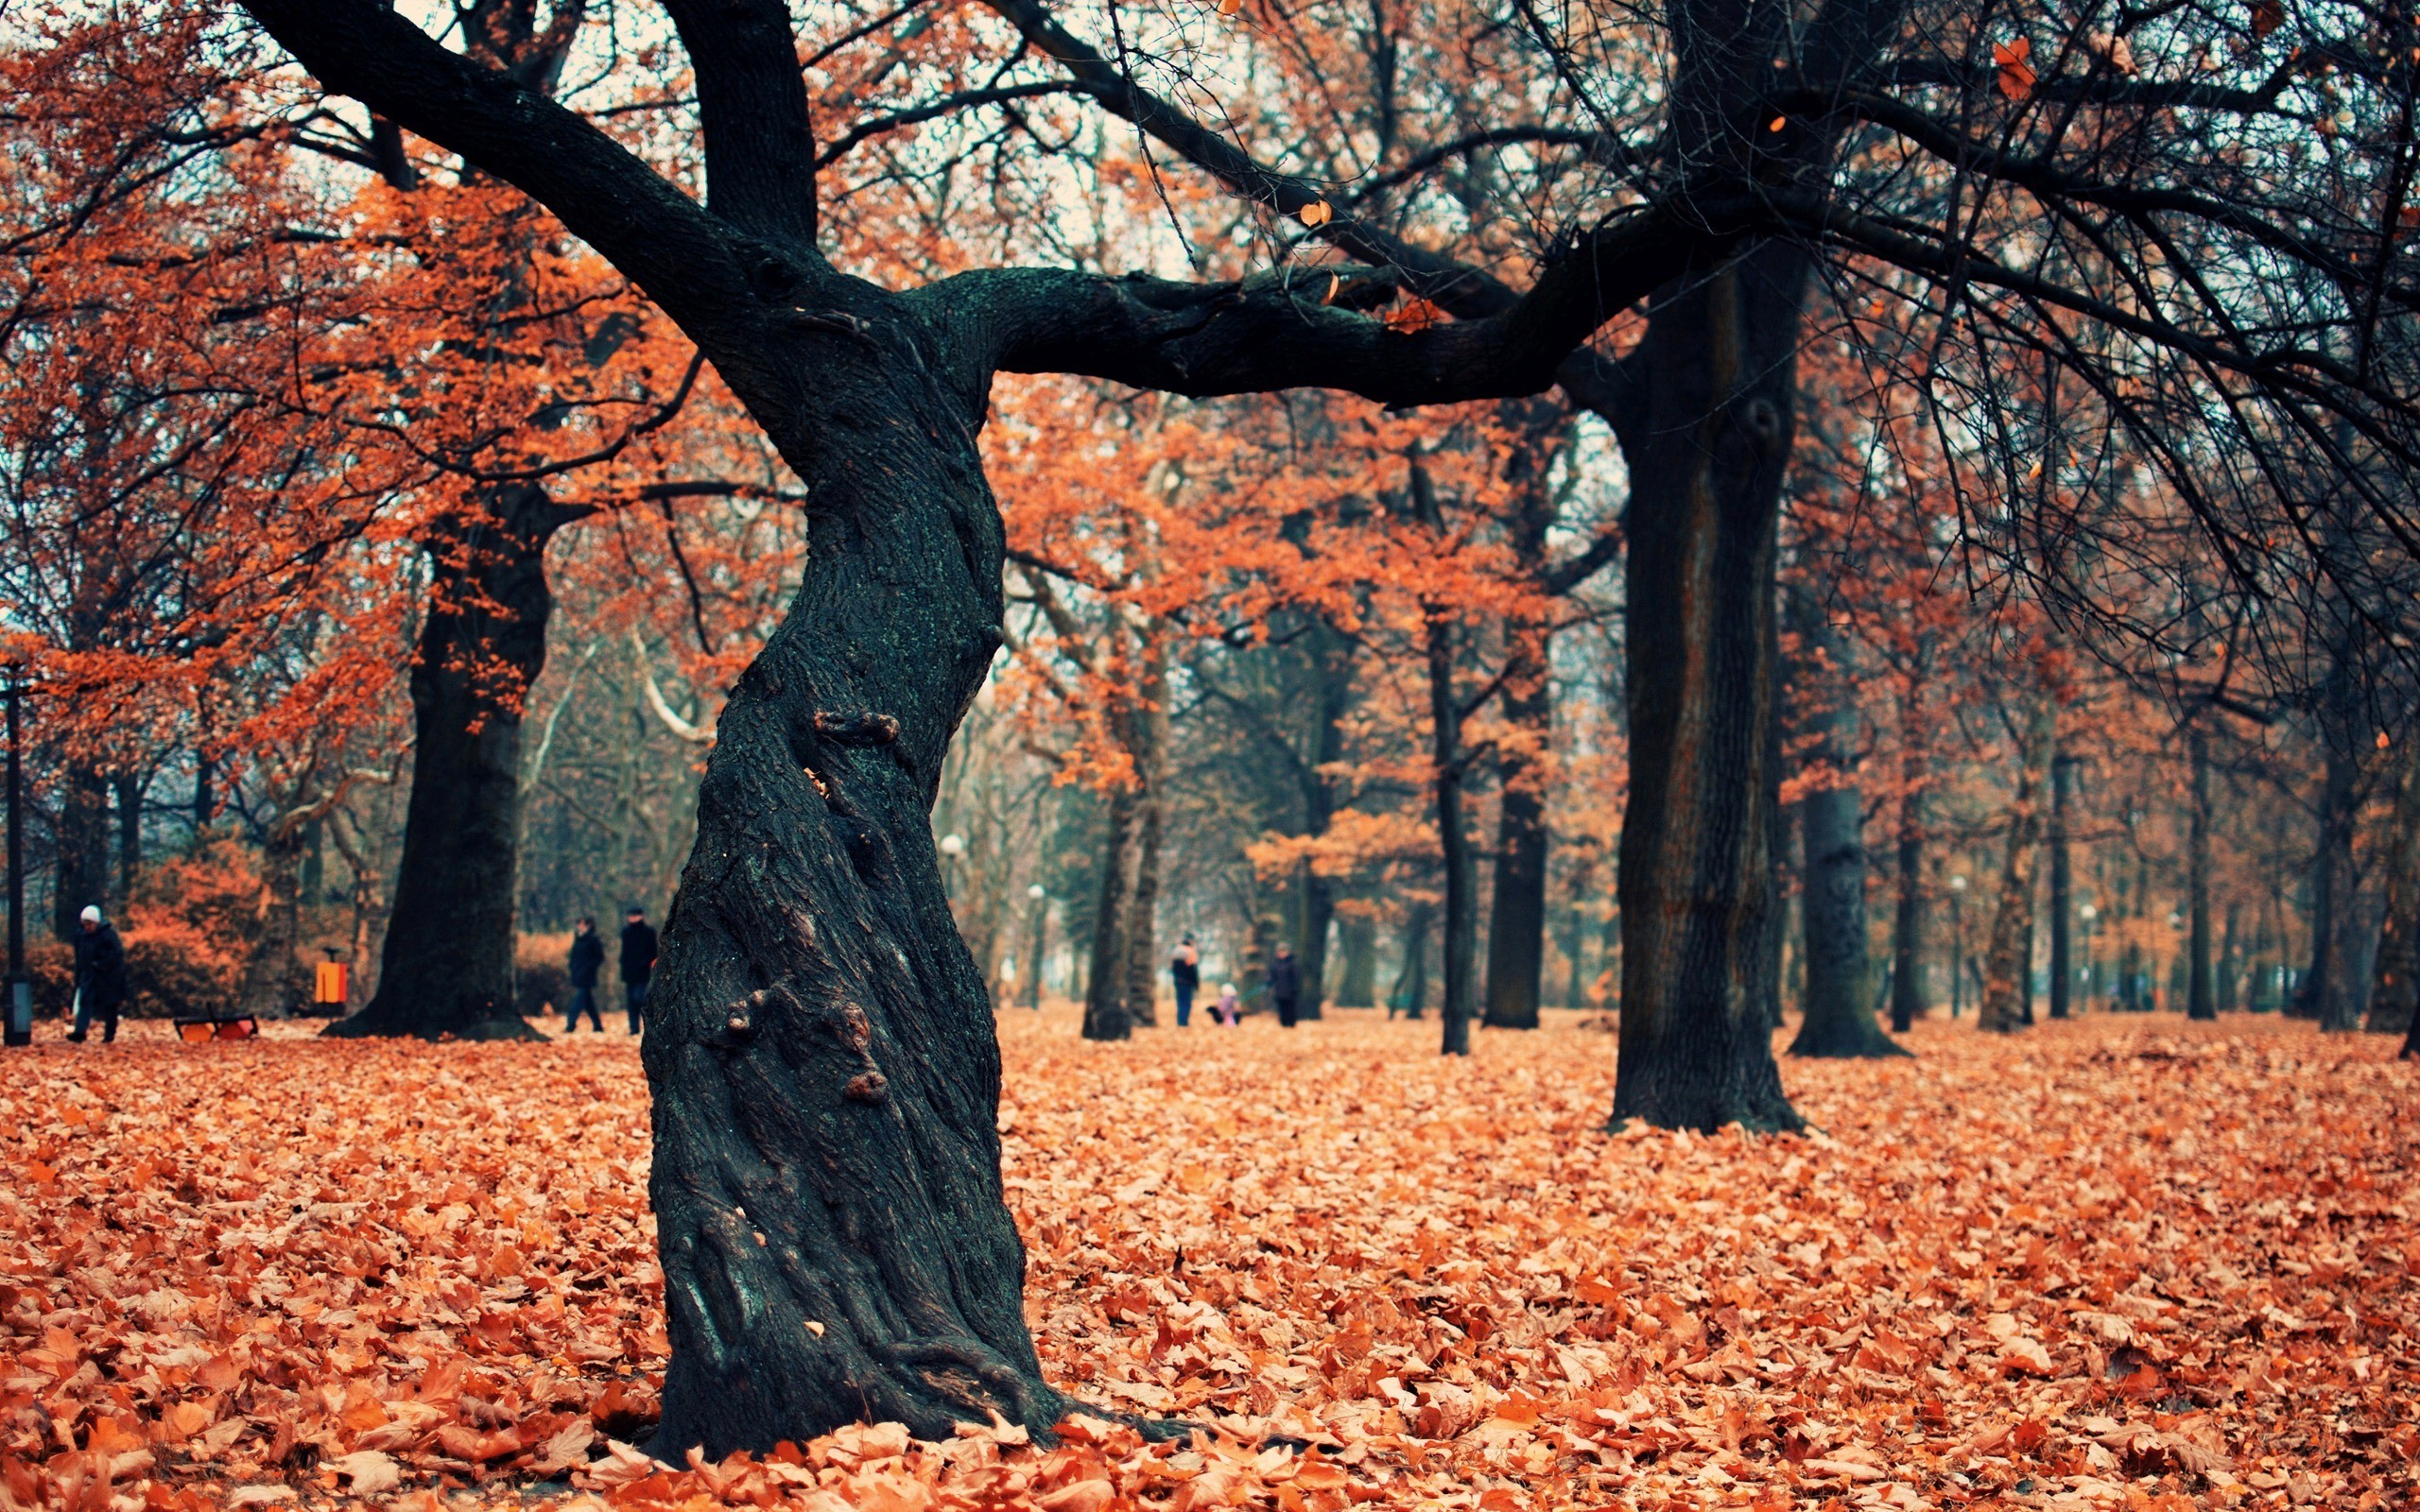 General 2560x1600 trees leaves park plants people outdoors fall fallen leaves